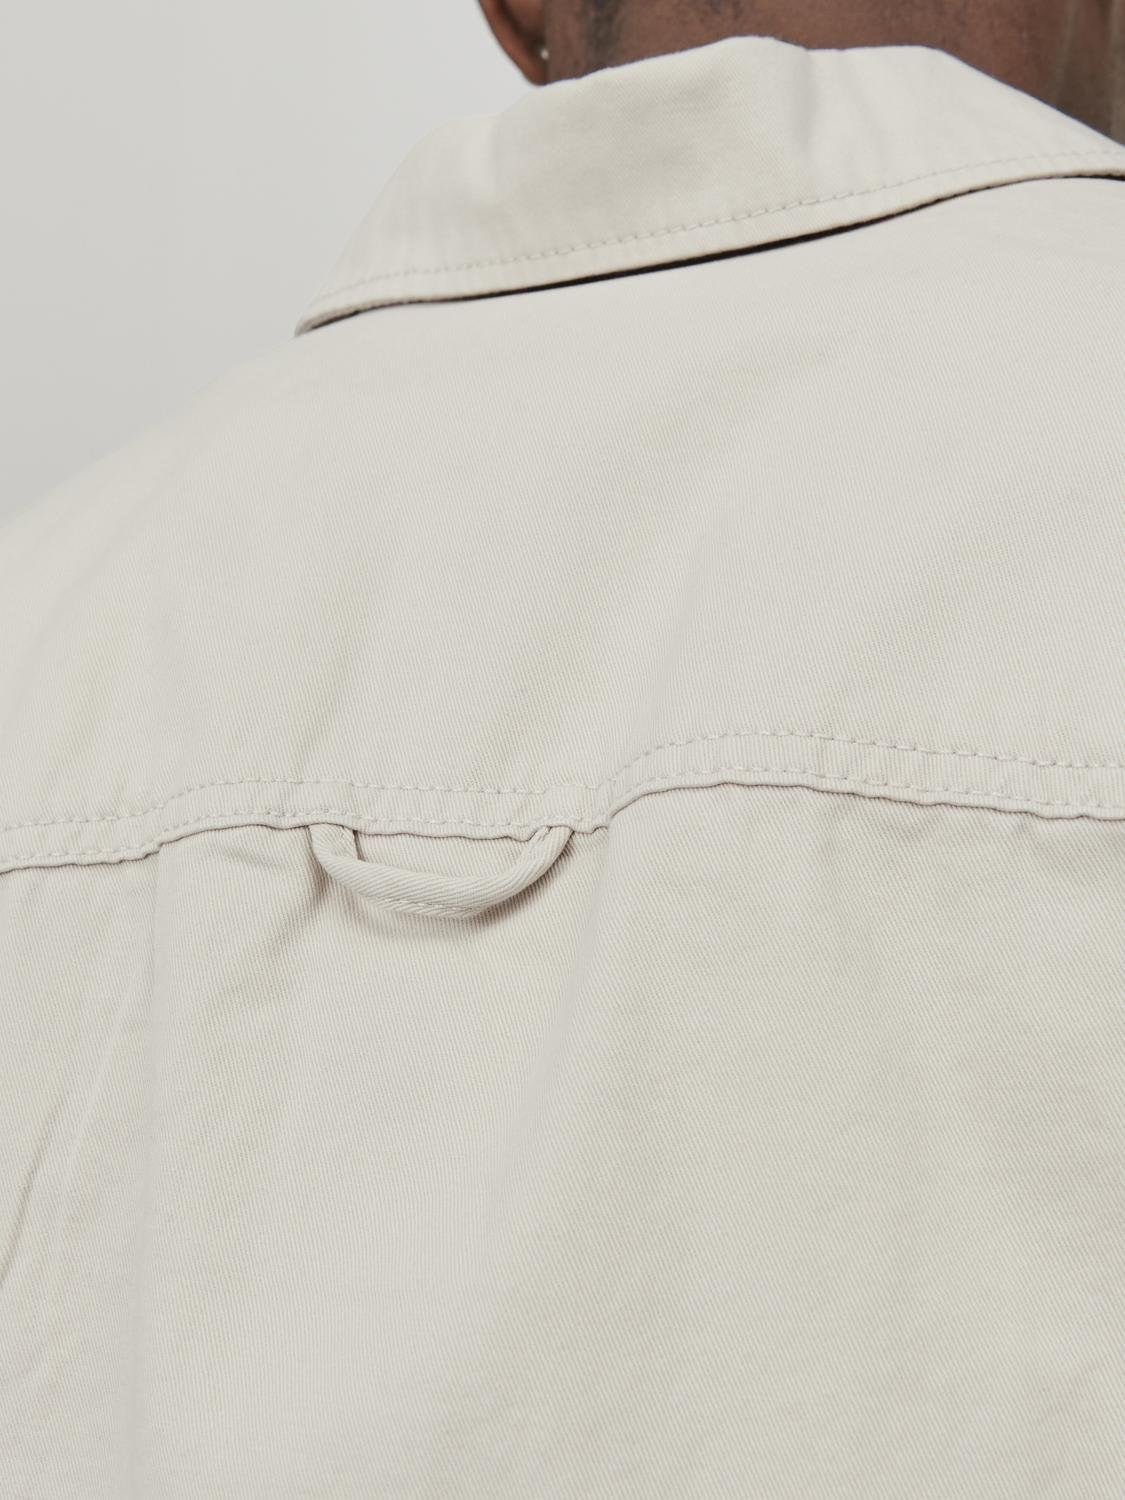 Men's Collective Zac Overshirt Long Sleeve-Moonbeam-Close View of Back